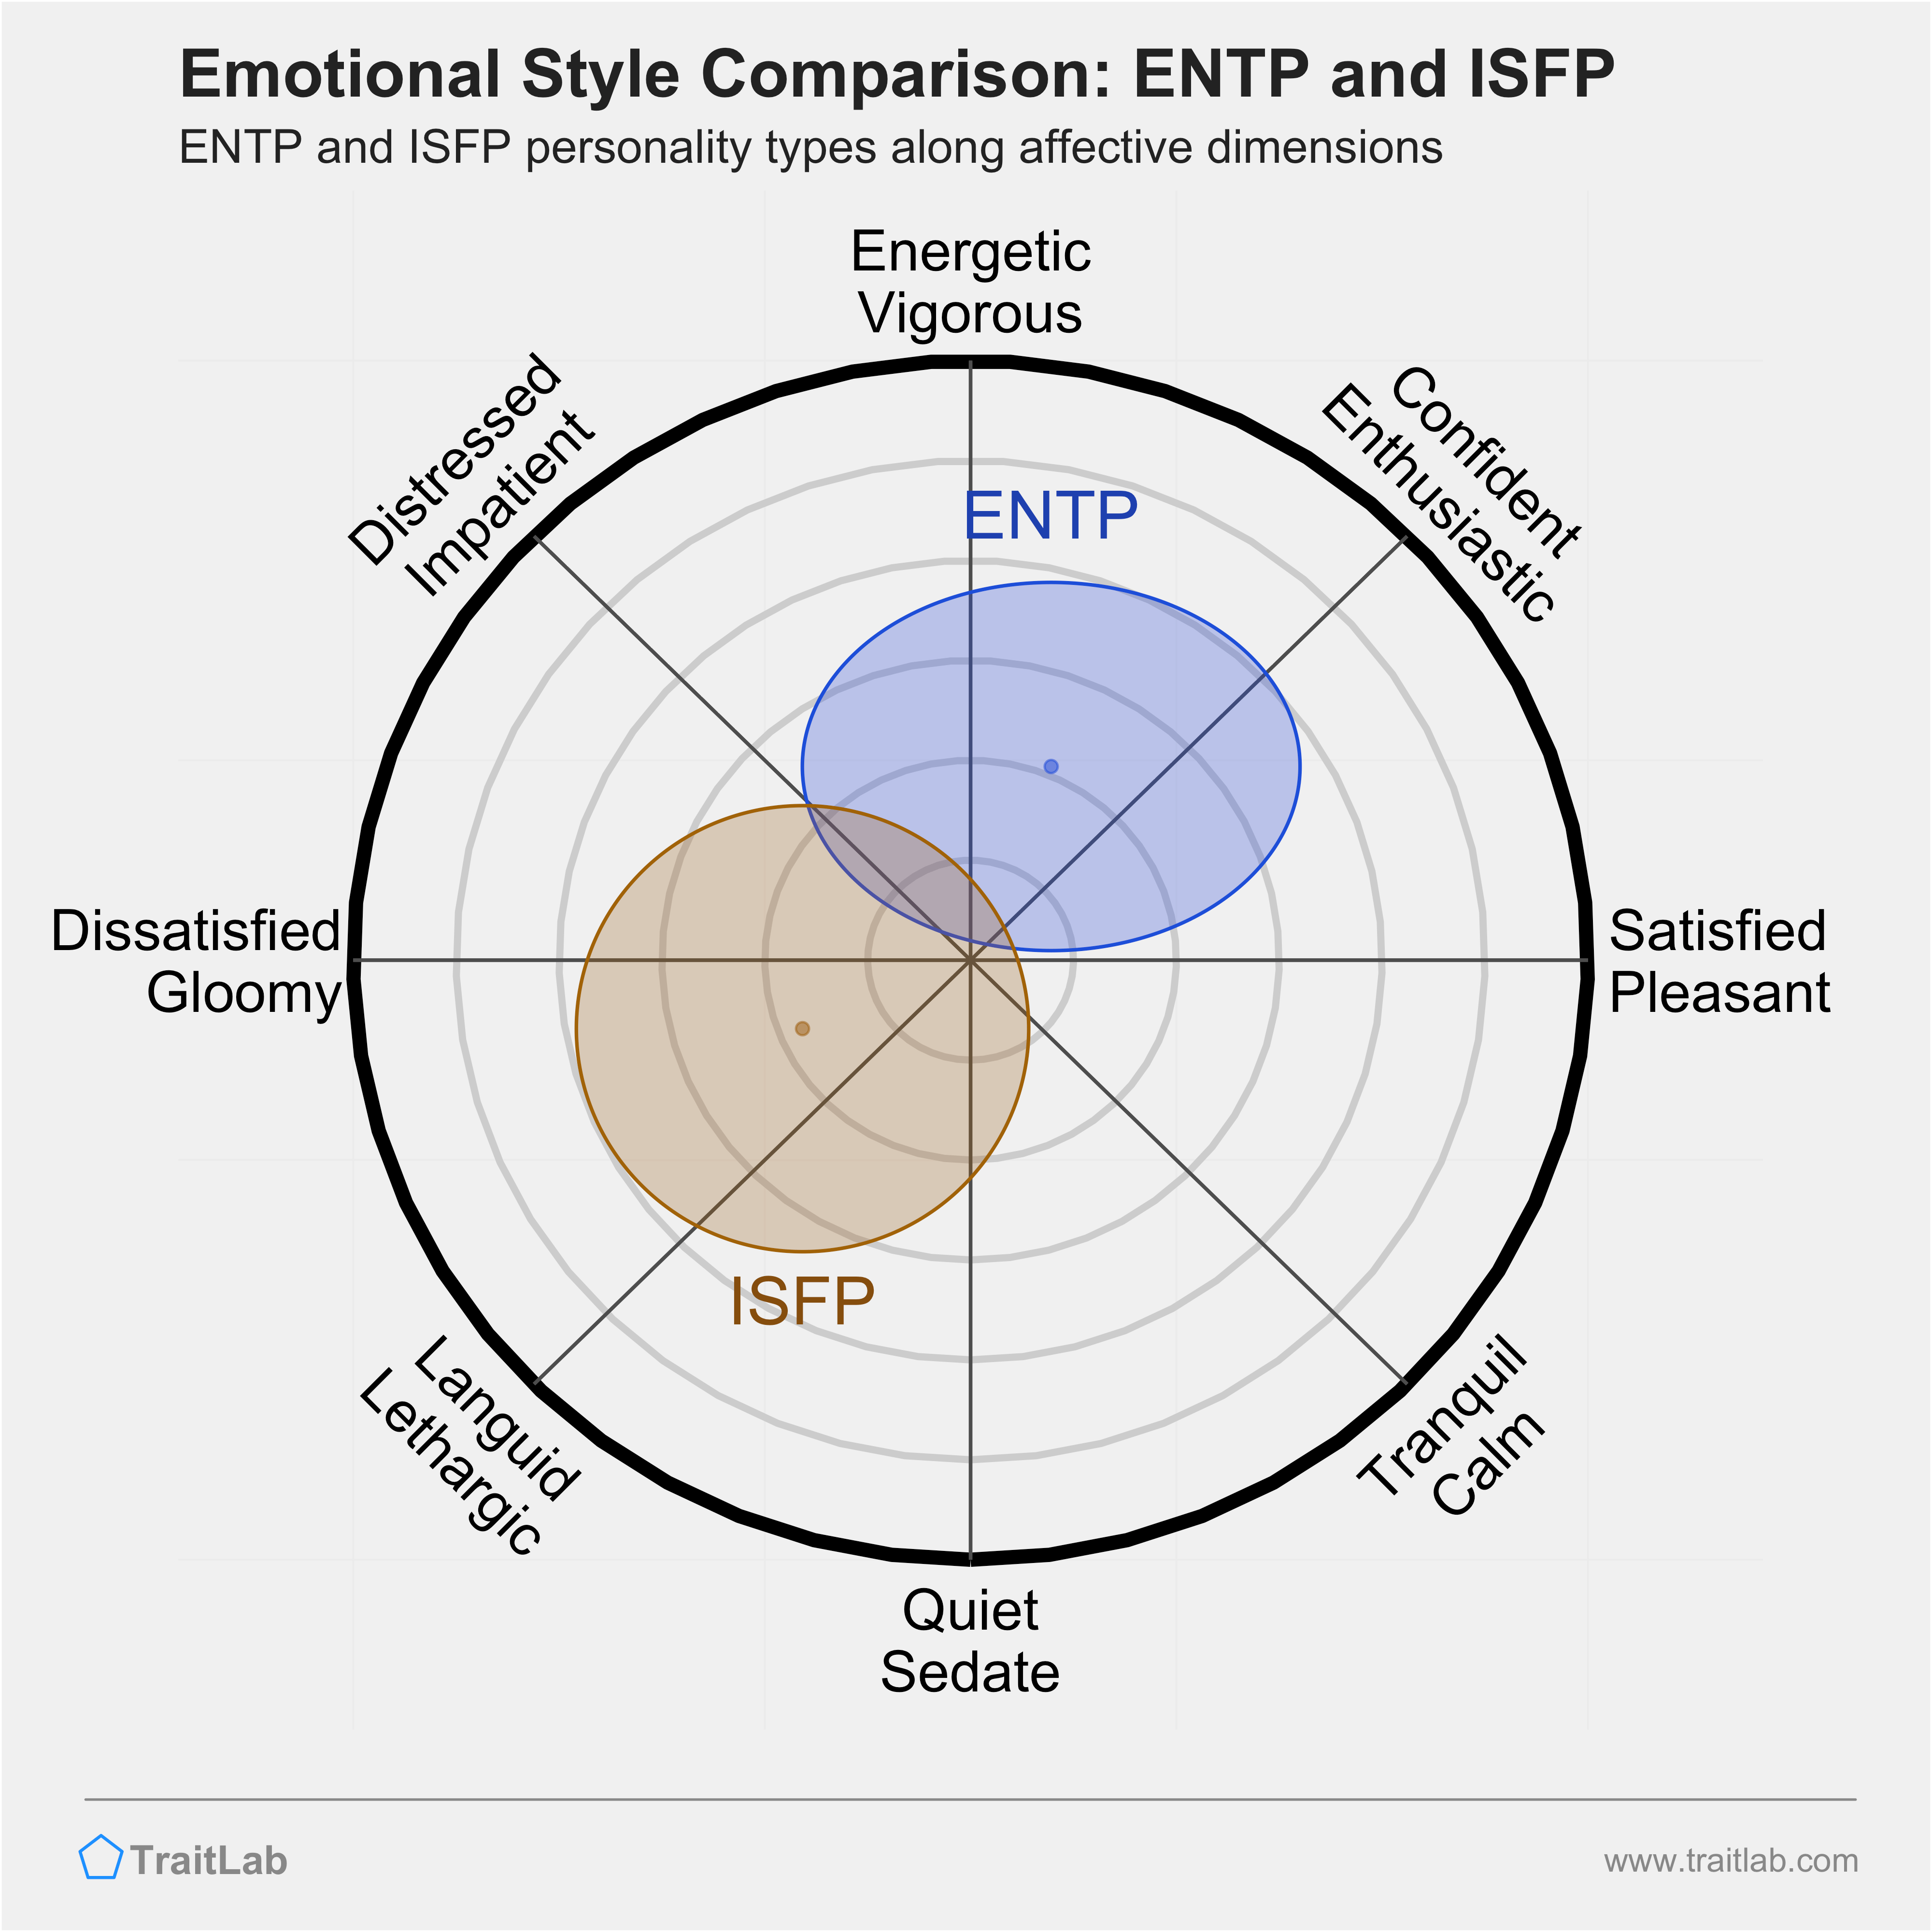 ENTP and ISFP comparison across emotional (affective) dimensions